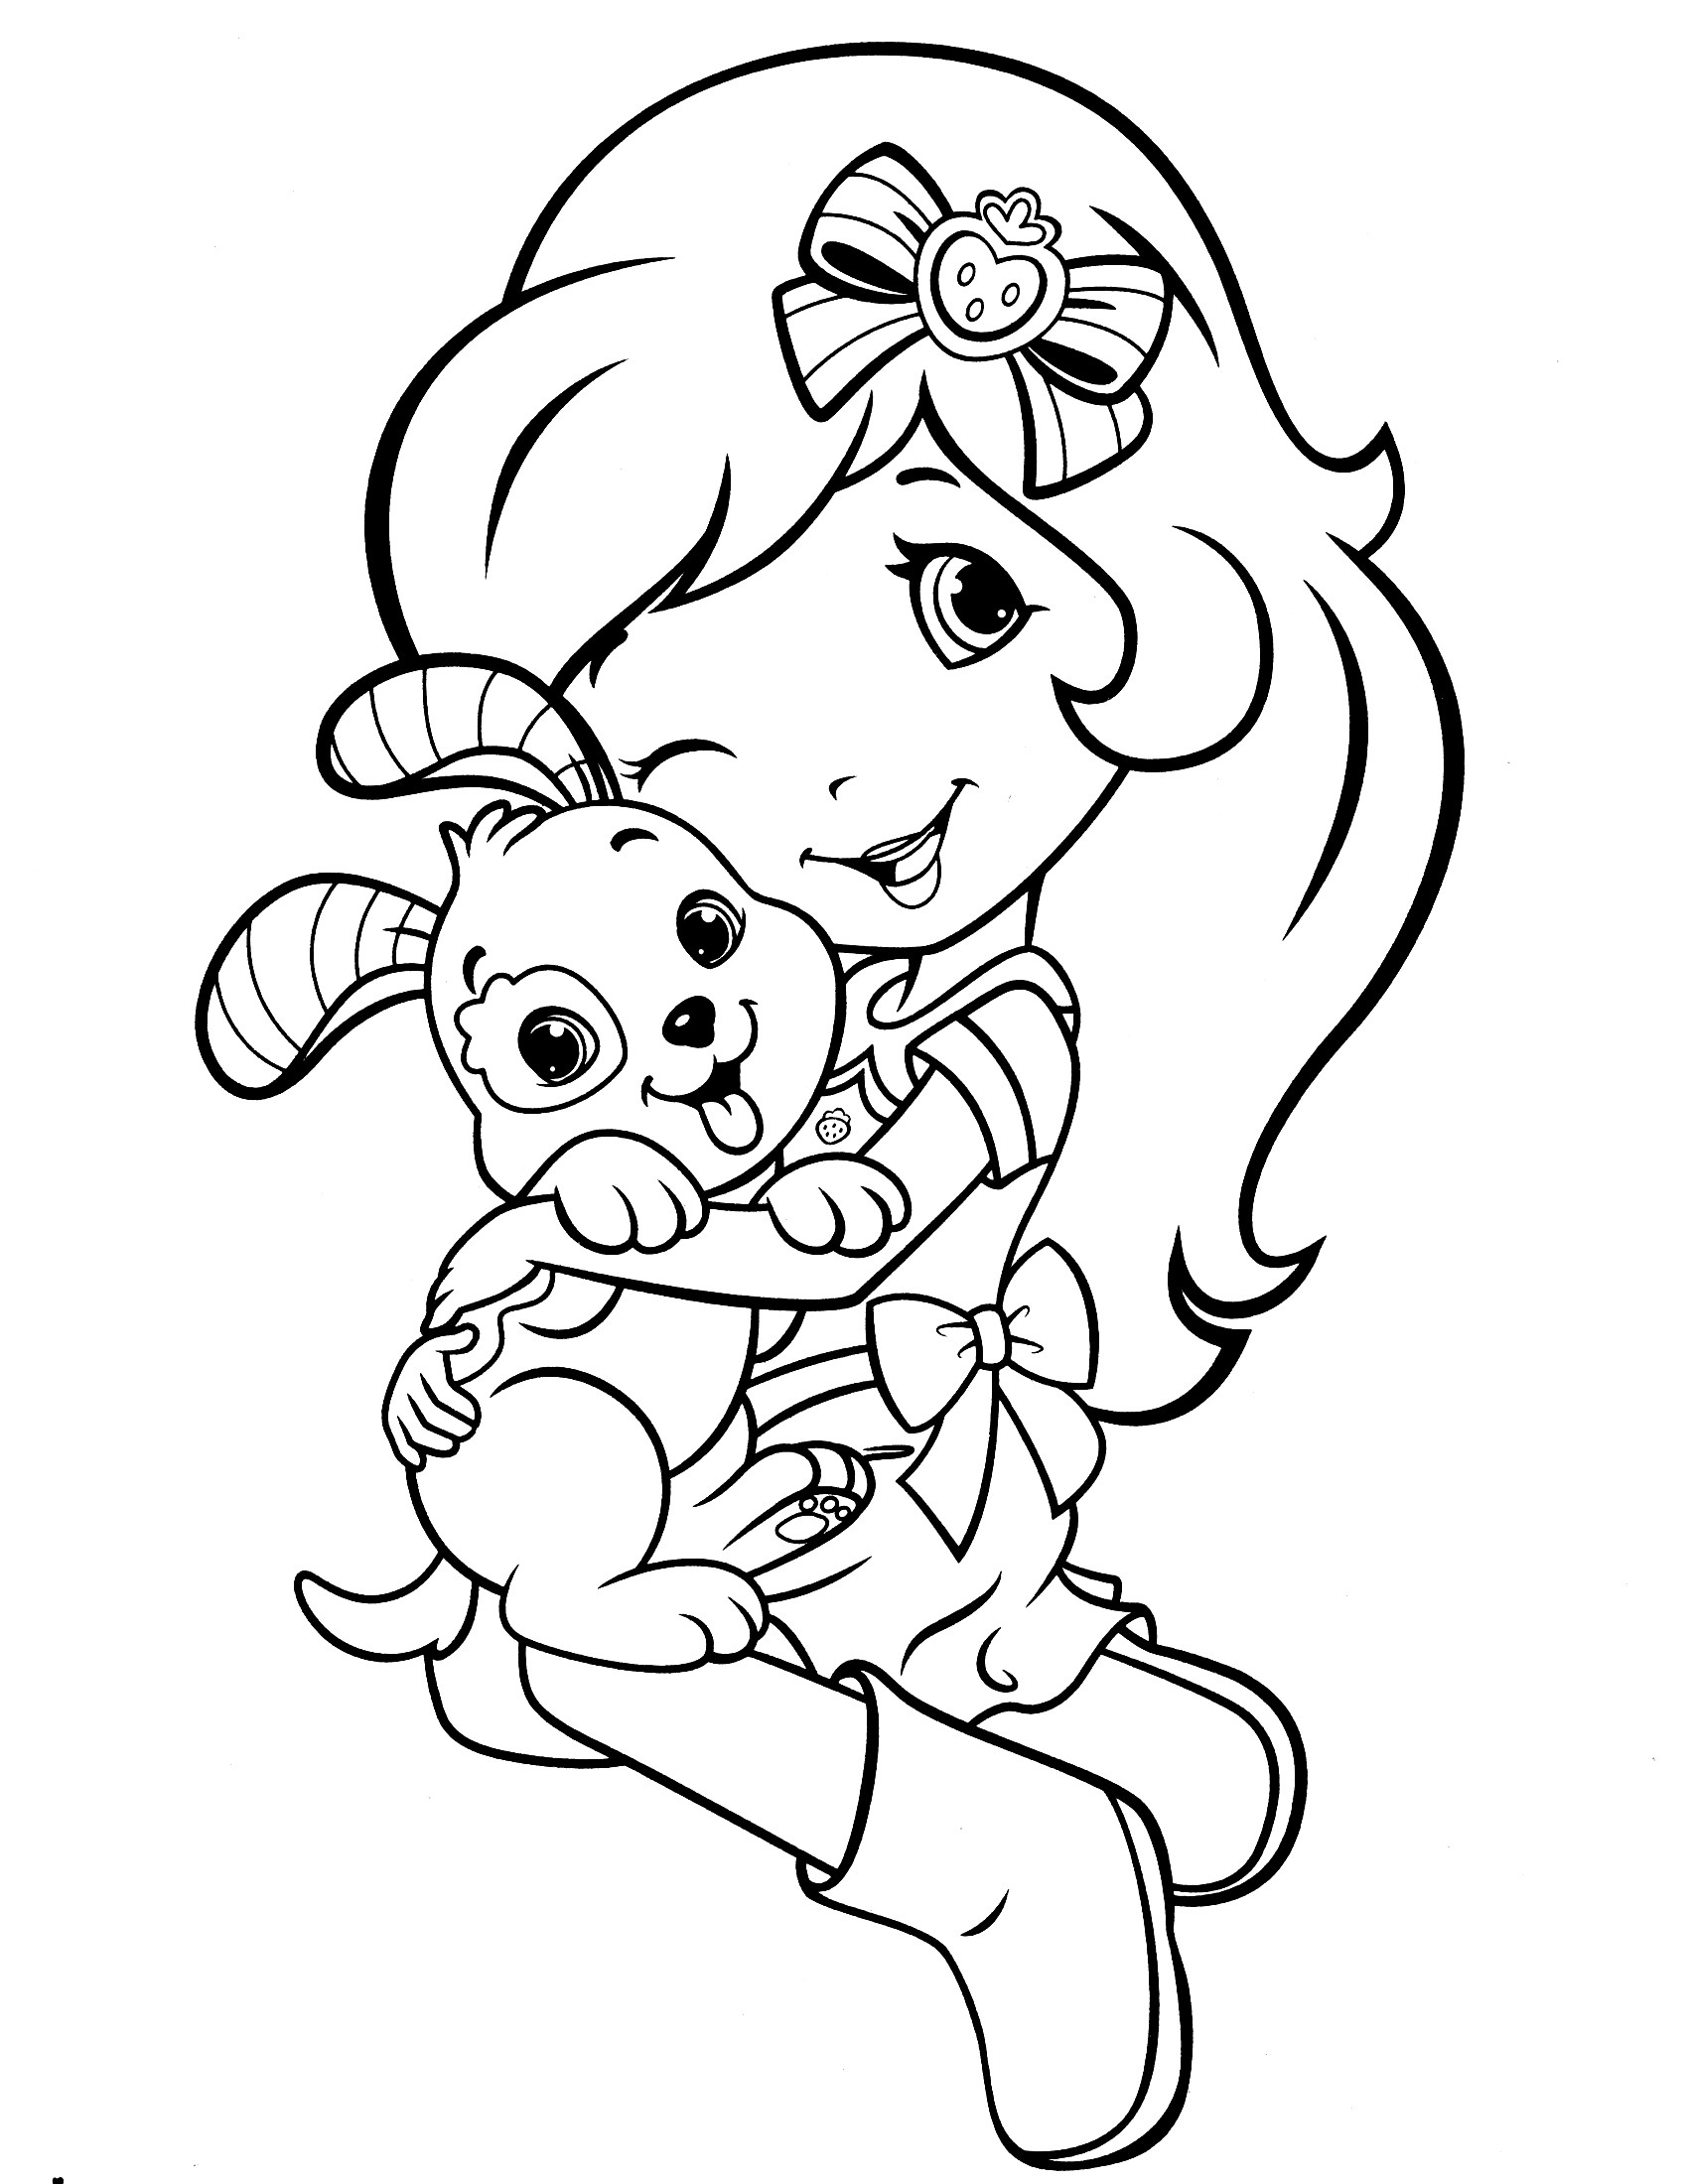 Awesome Coloring Pages For Kids
 Strawberry Shortcake Coloring Pages Cool coloring pages